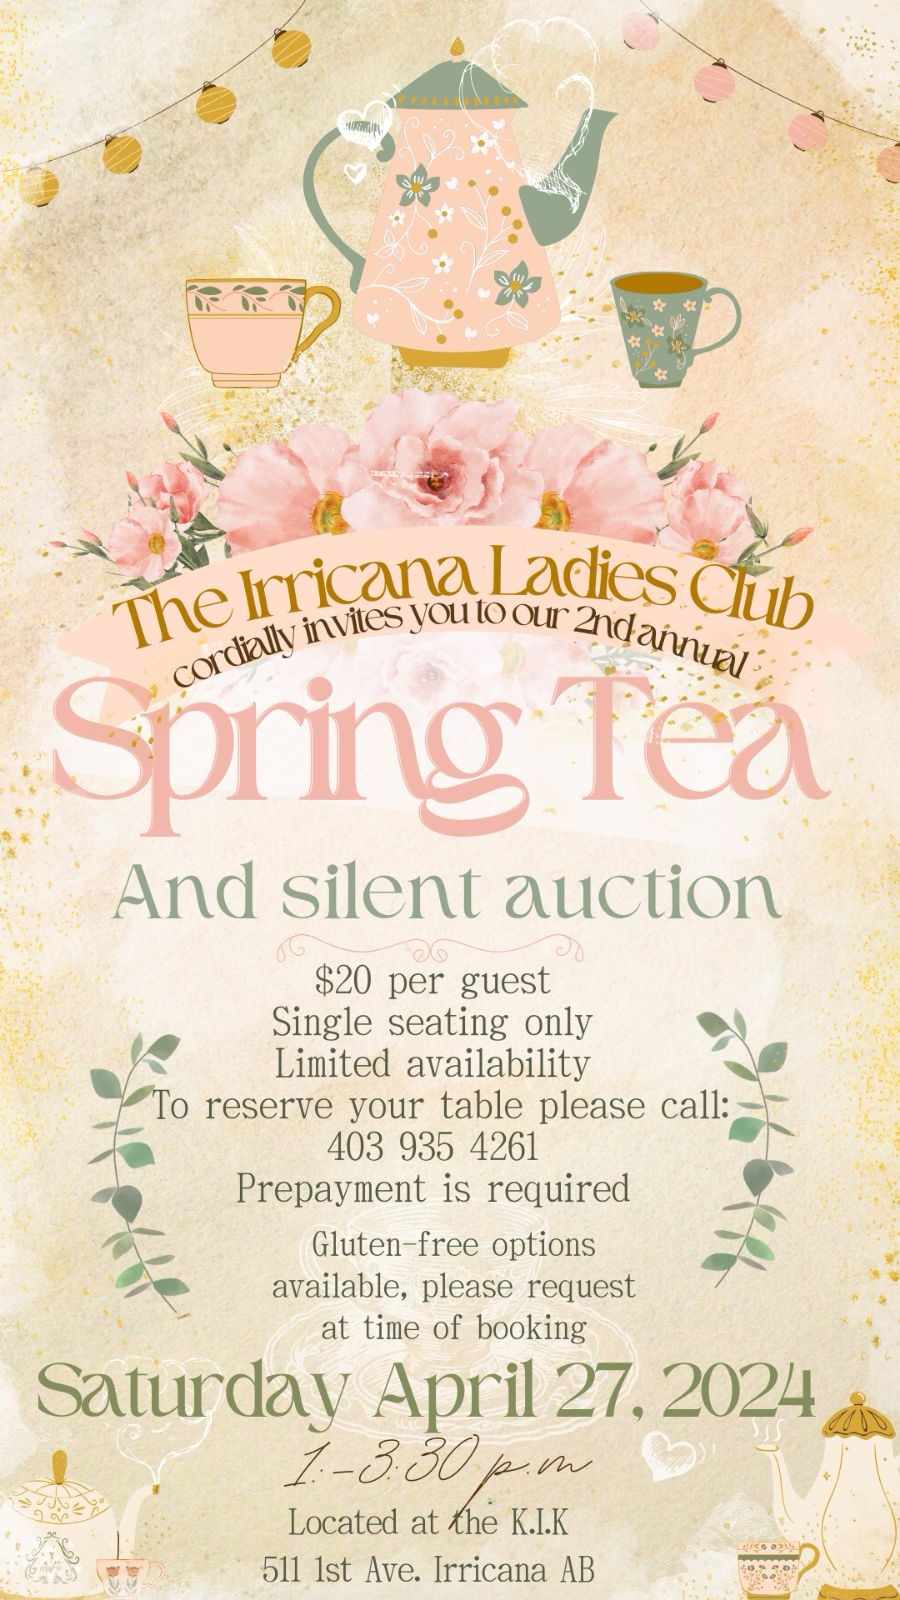 Irricana Ladies Club 2nd Annual Spring Tea and Silent Auction 2024